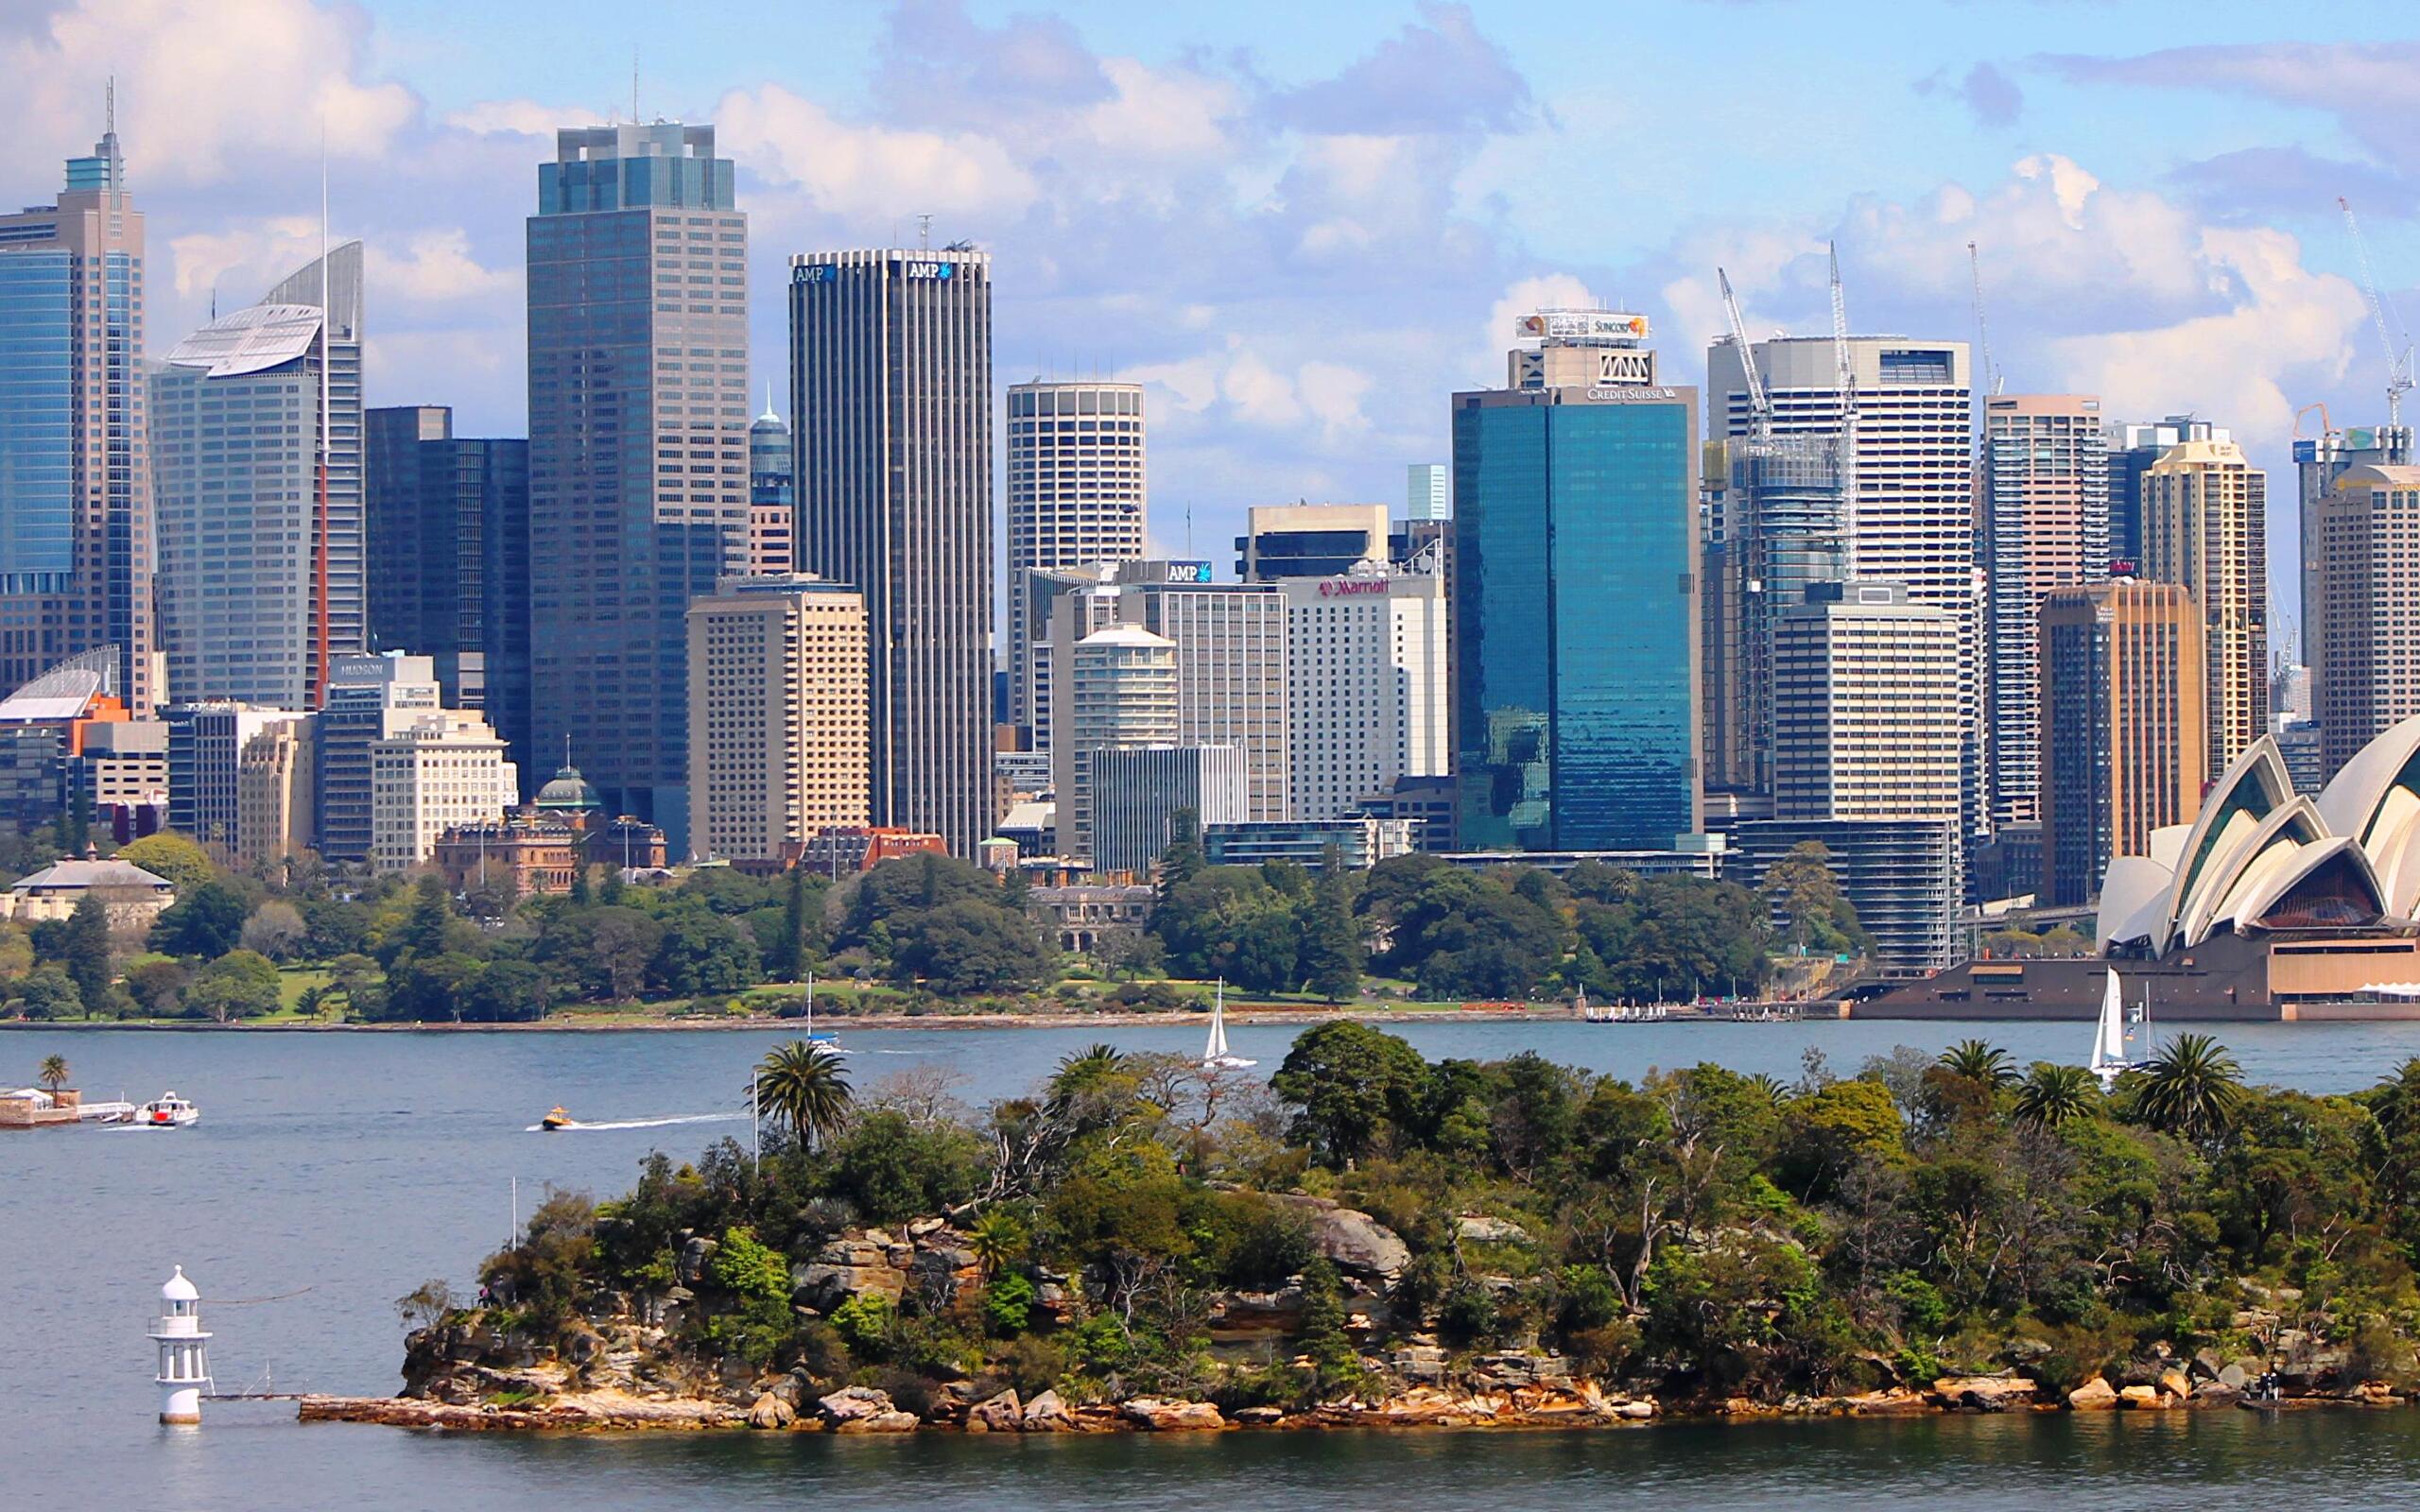 Sydney 4K wallpaper for your desktop or mobile screen free and easy to download